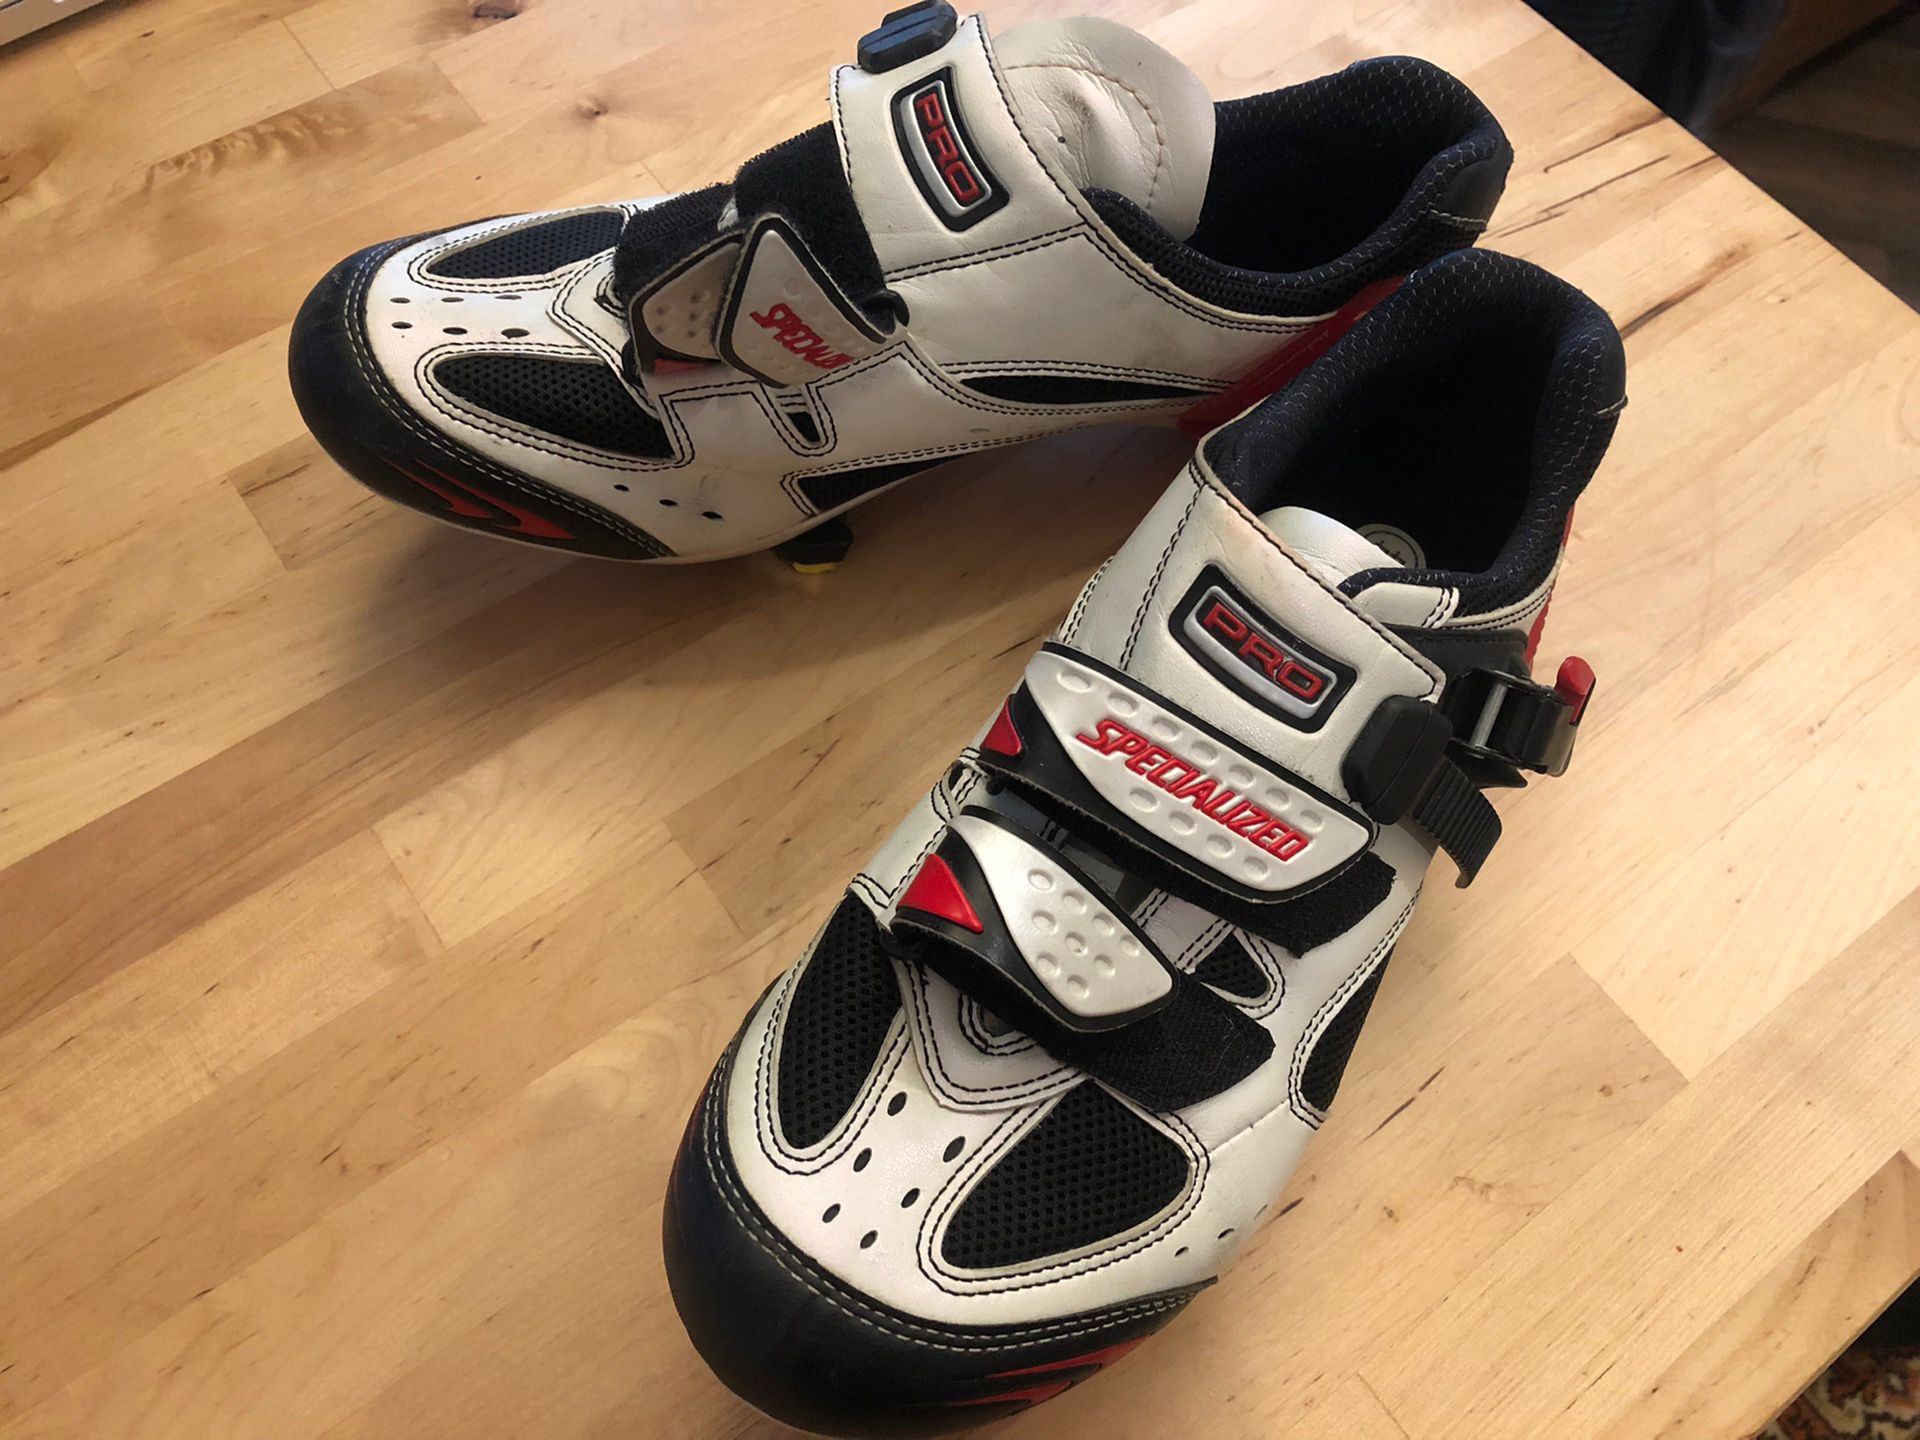 Specialized Pro Bicycle Shoes With Cleats SPD-SL